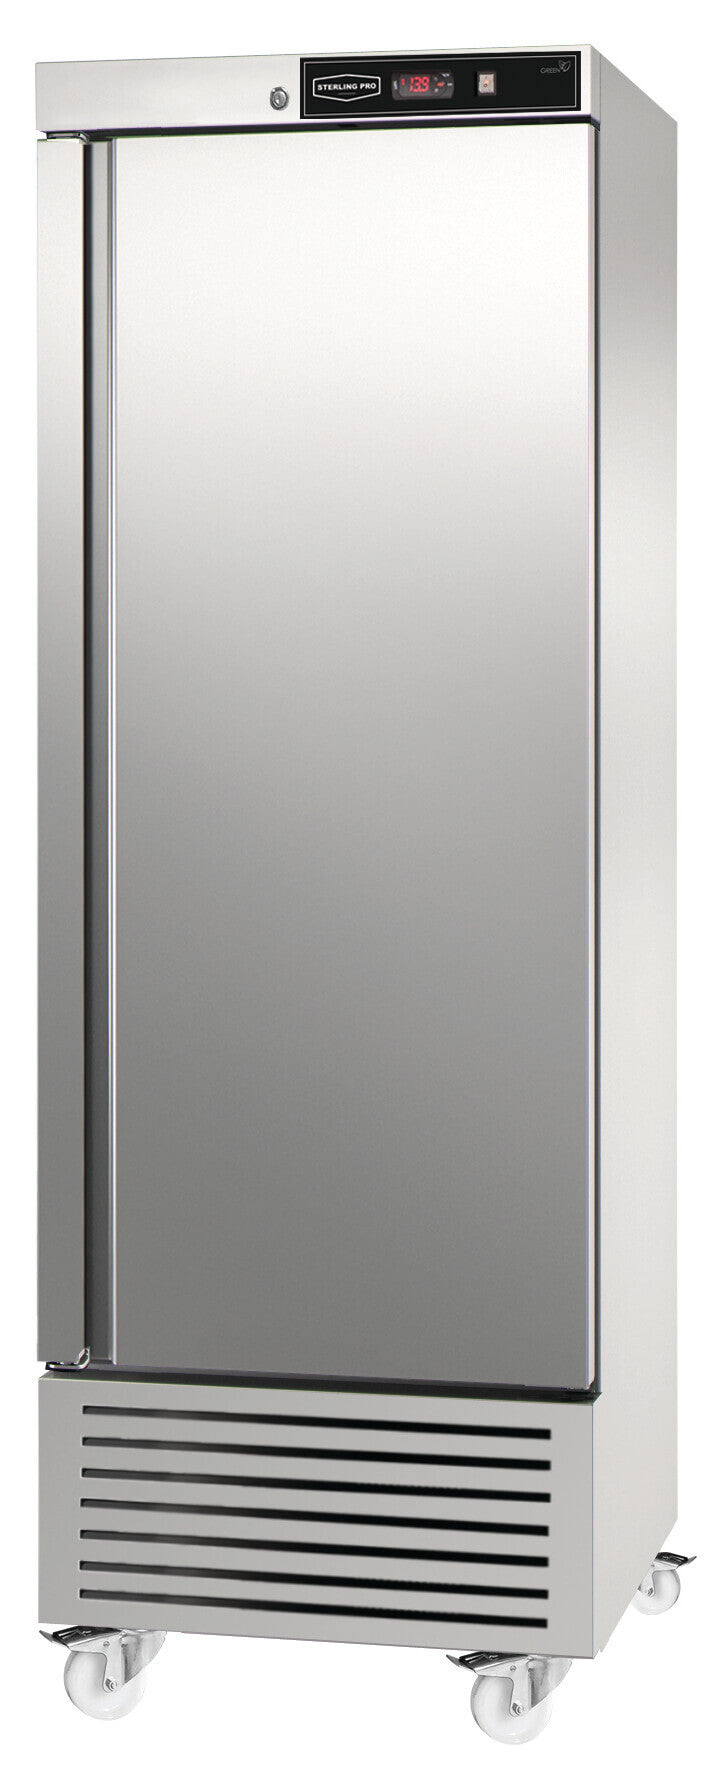 Sterling Pro Green SPI600R Single Door Right Hinged Upright Fridge  600 Litres 2 Years Parts & Labour